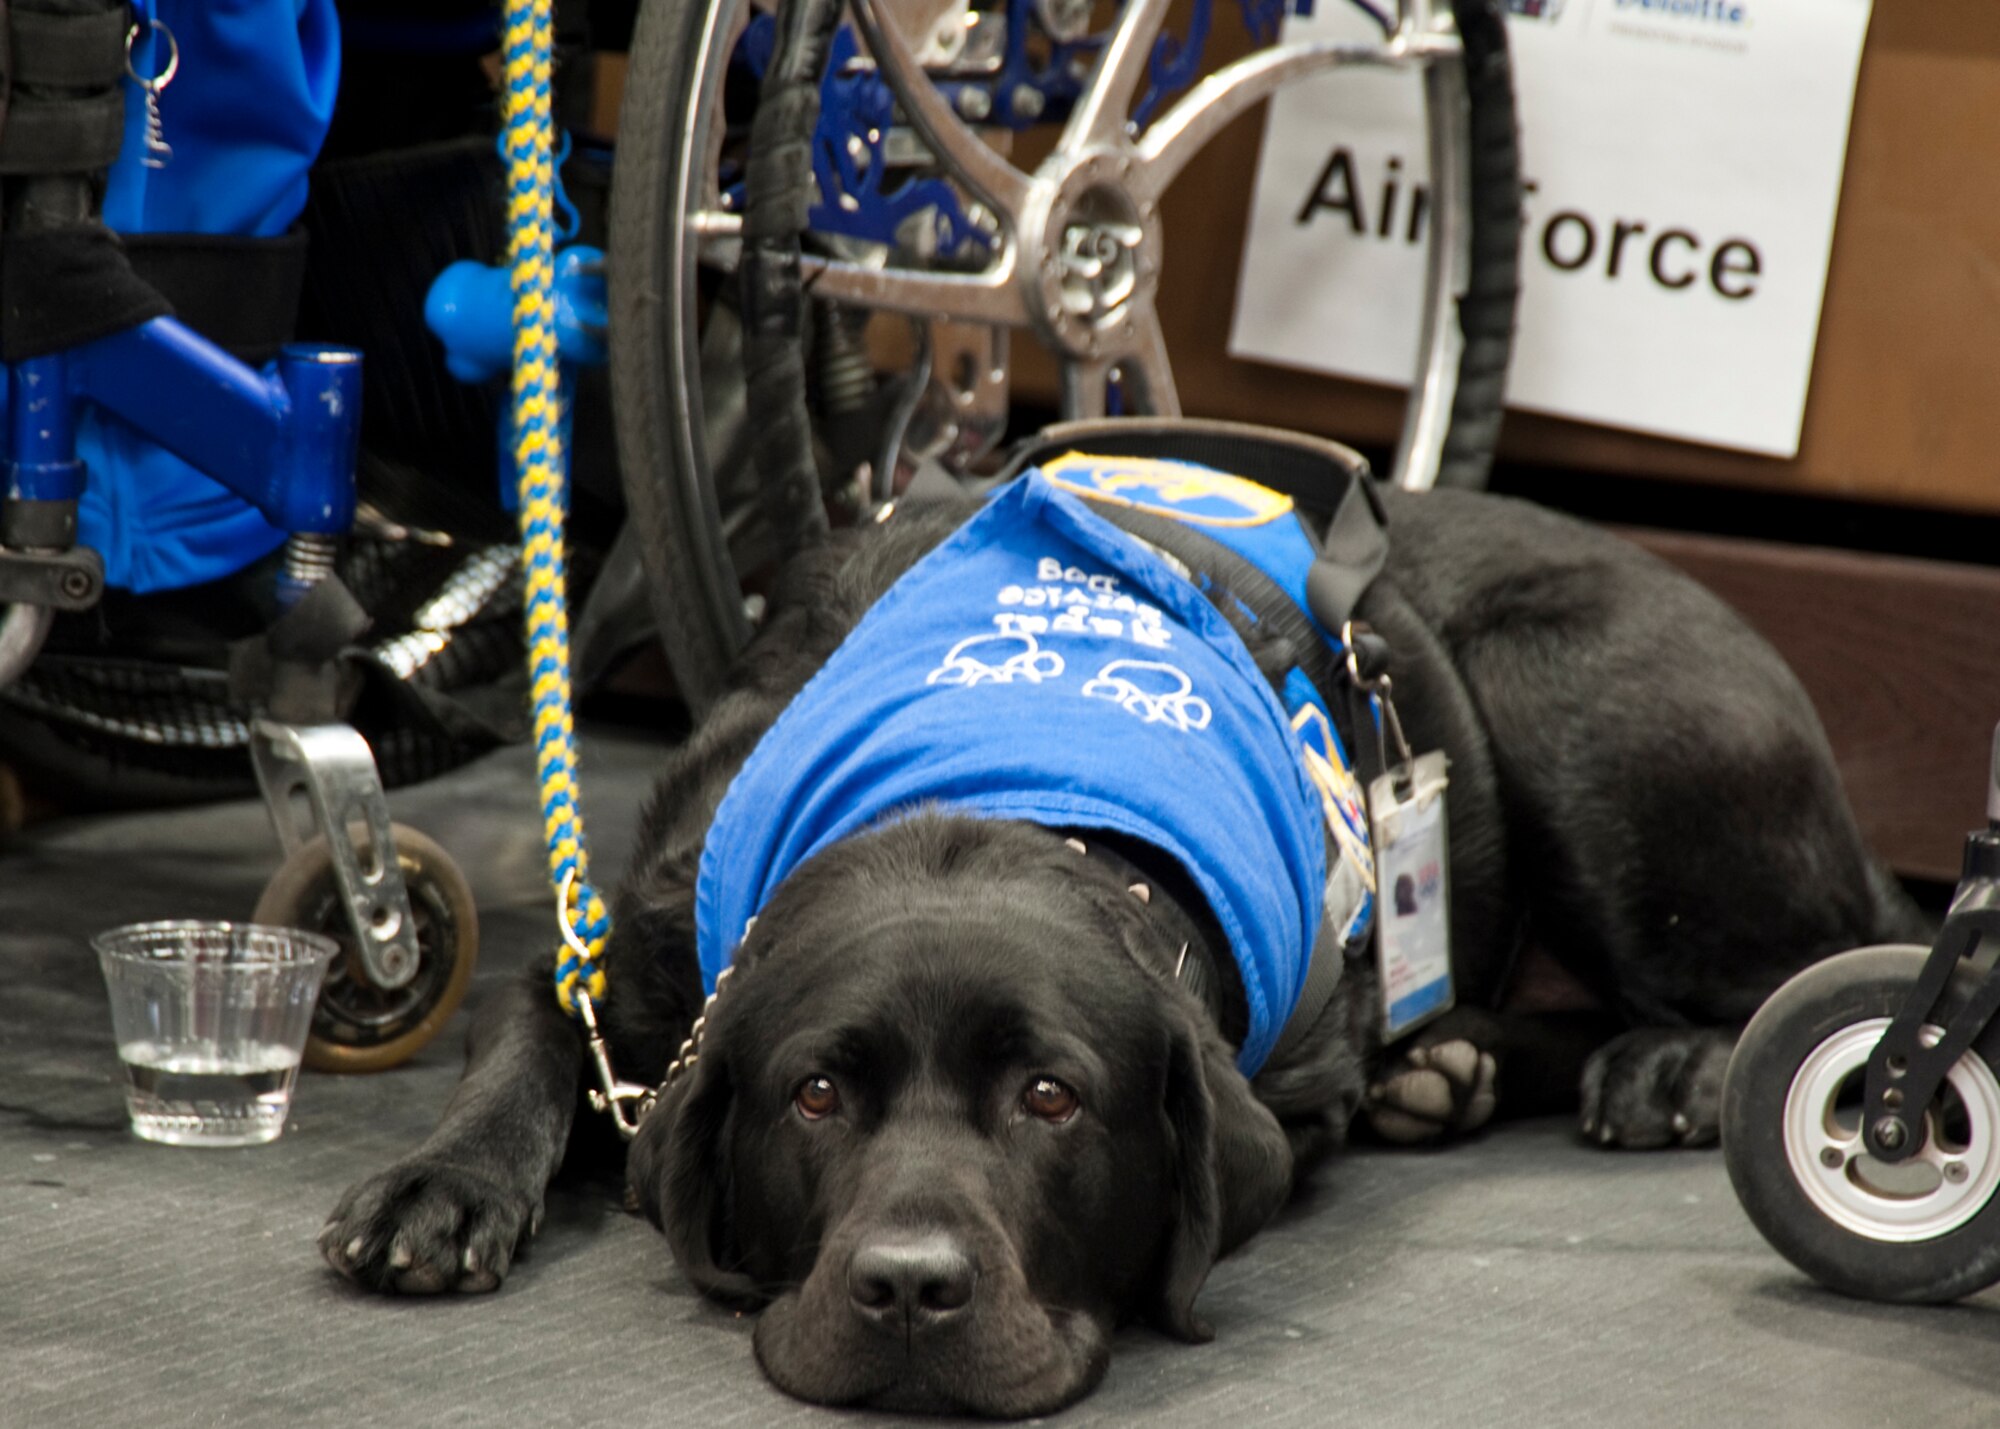 Retired Staff Sgt. Jason Morgan's dog Nepal waits patiently for the 2011 Warrior Games opening ceremony to begin May 16, 2011, at the U.S. Olympic Training Center in Colorado Springs, Colo. Sergeant Morgan is a member of the Air Force team.  (U.S. Air Force photo/Staff Sgt. J. Paul Croxon)